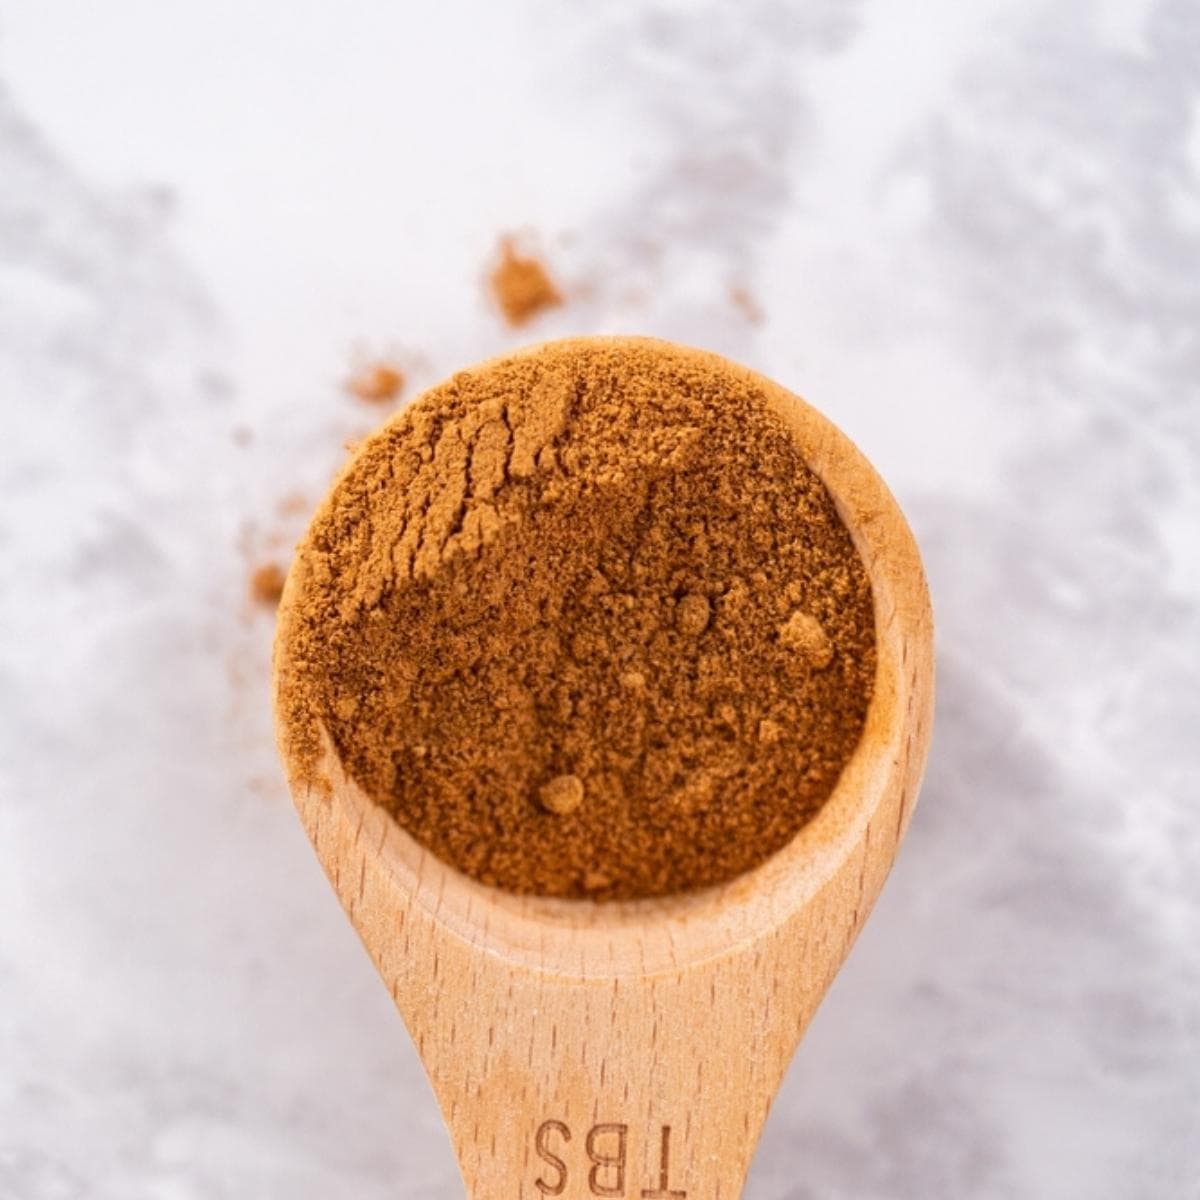 Pumpkin Spice Mix on a Wooden Spoon 